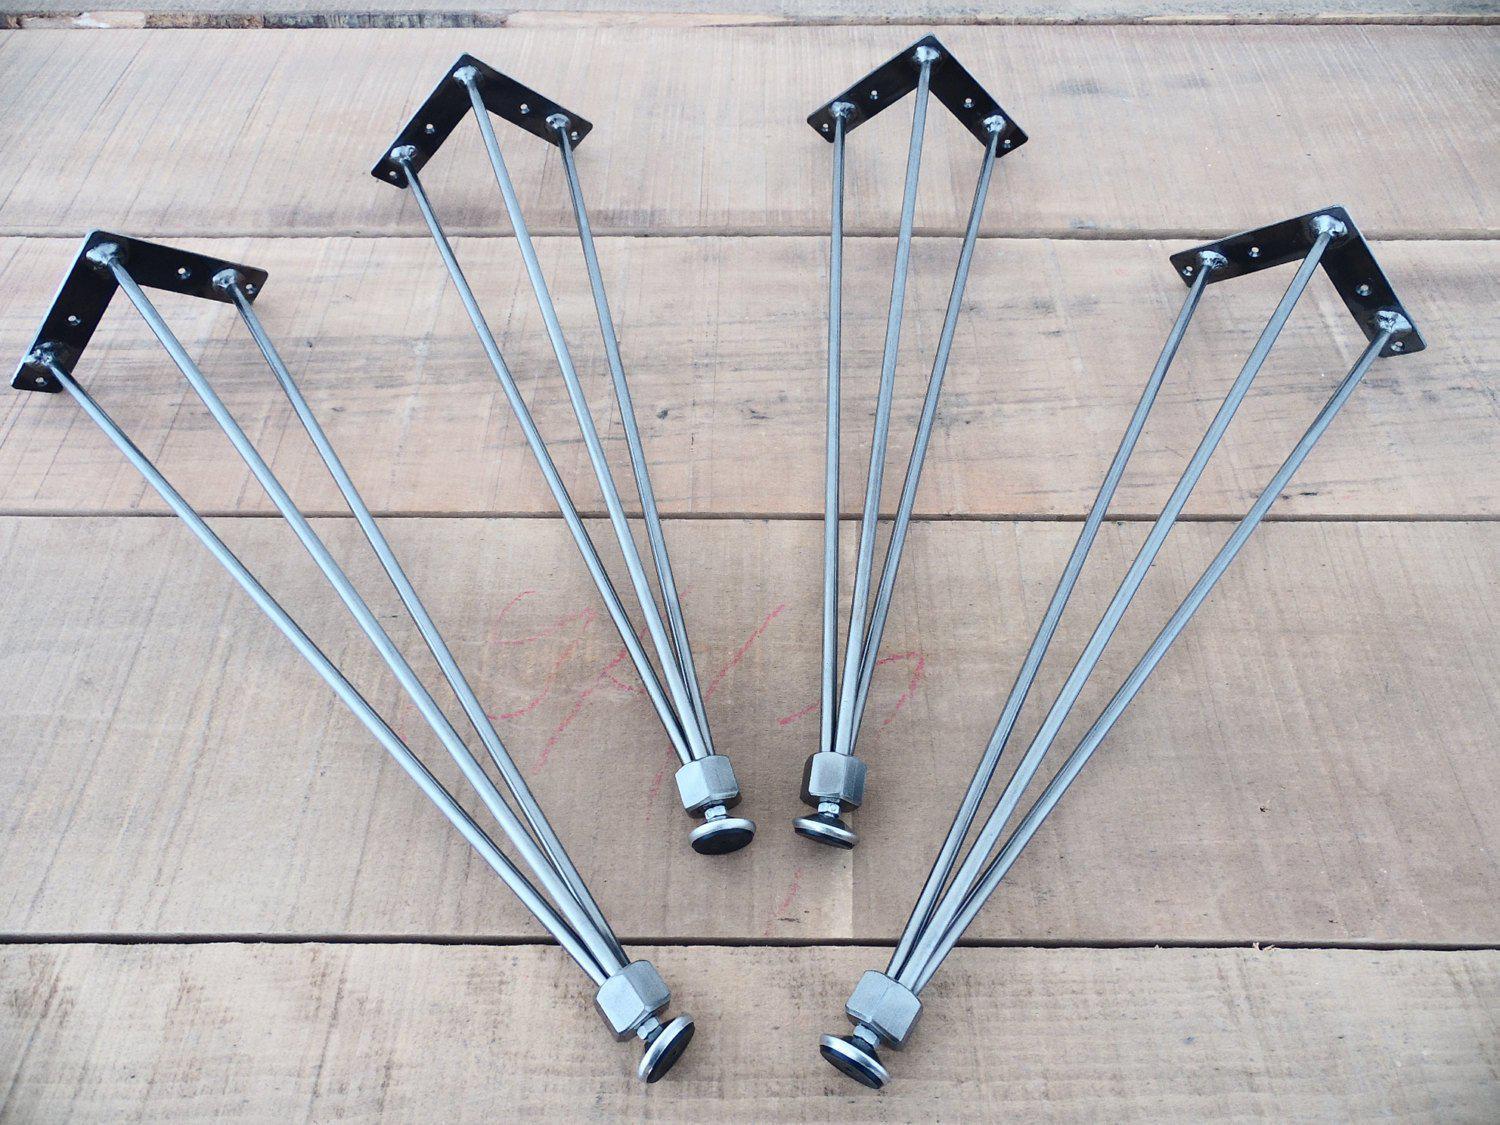 16"  3-pin-nuts Table Legs, Height 12" - 16" Set(4)